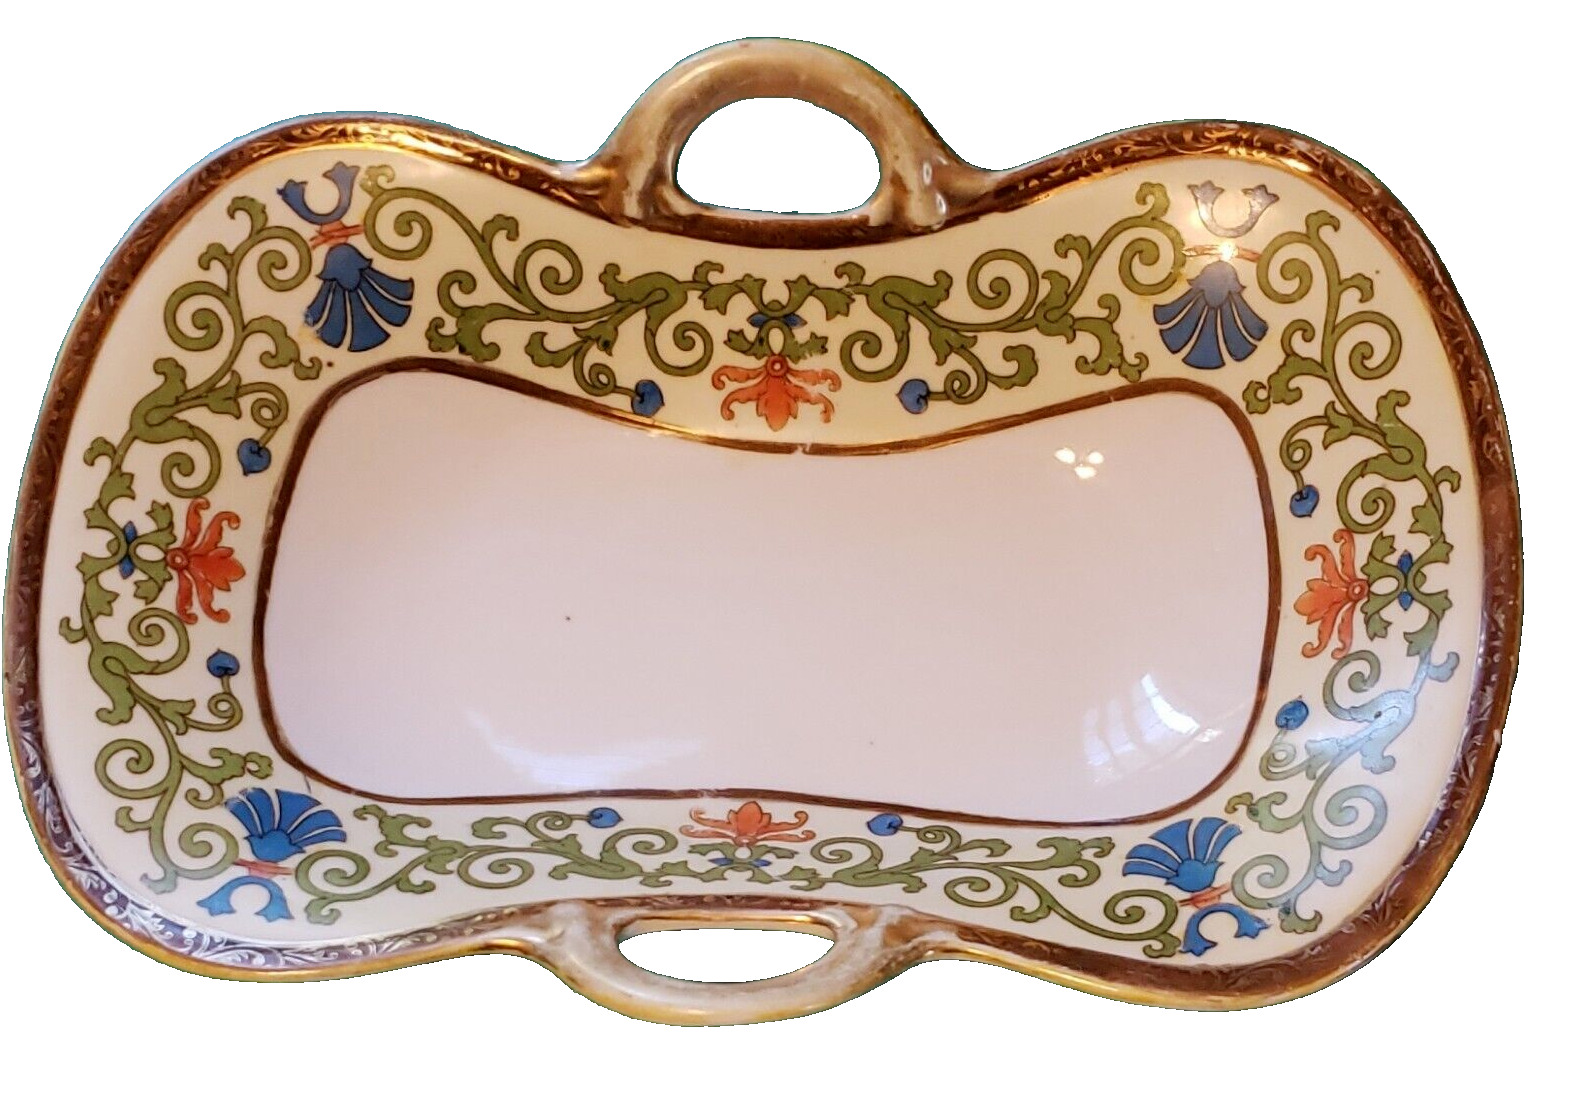 Nippon Hand Painted Antique Porcelain Rectangular Handled Dish Tray 11